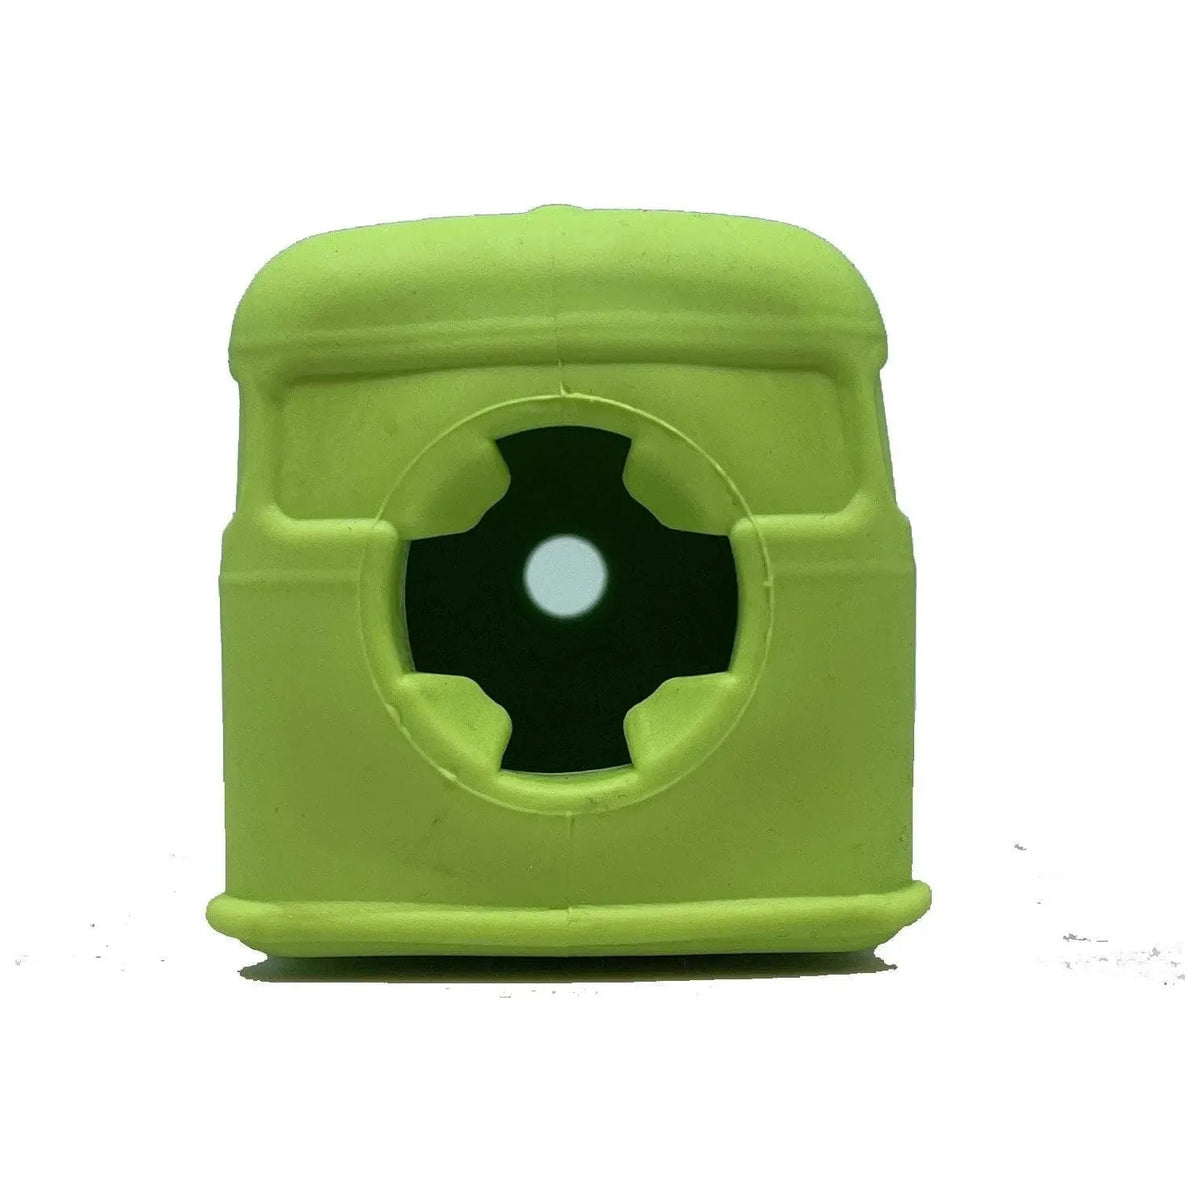 SodaPup/True Dogs, LLC Surf&#39;s Up! Retro Van  Durable Chew Toy &amp; Treat Dispenser by SodaPup/True Dogs, LLC